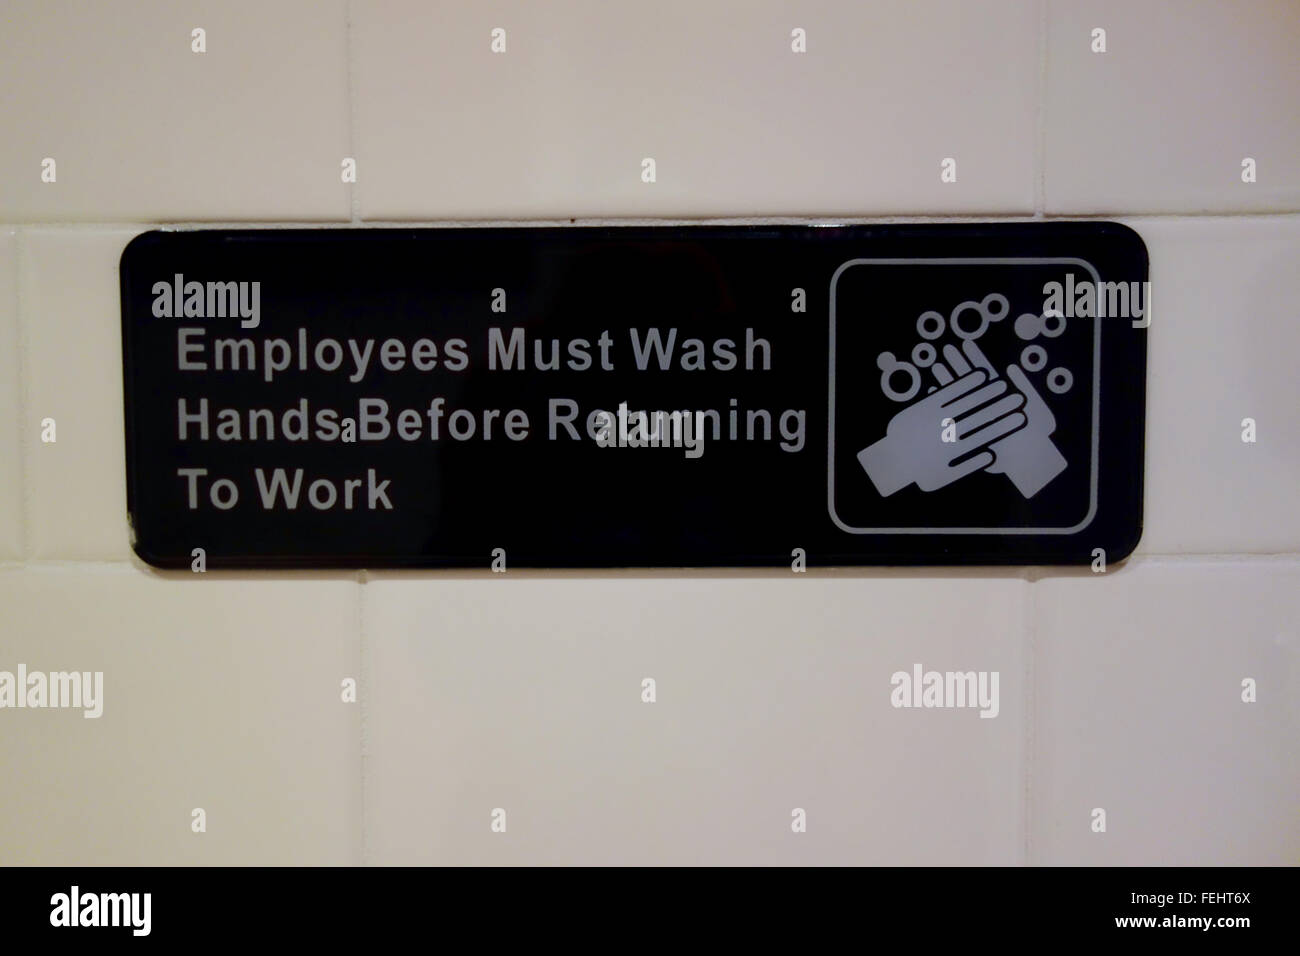 Employees Must Wash Hands Before Returning to Work Stock Photo